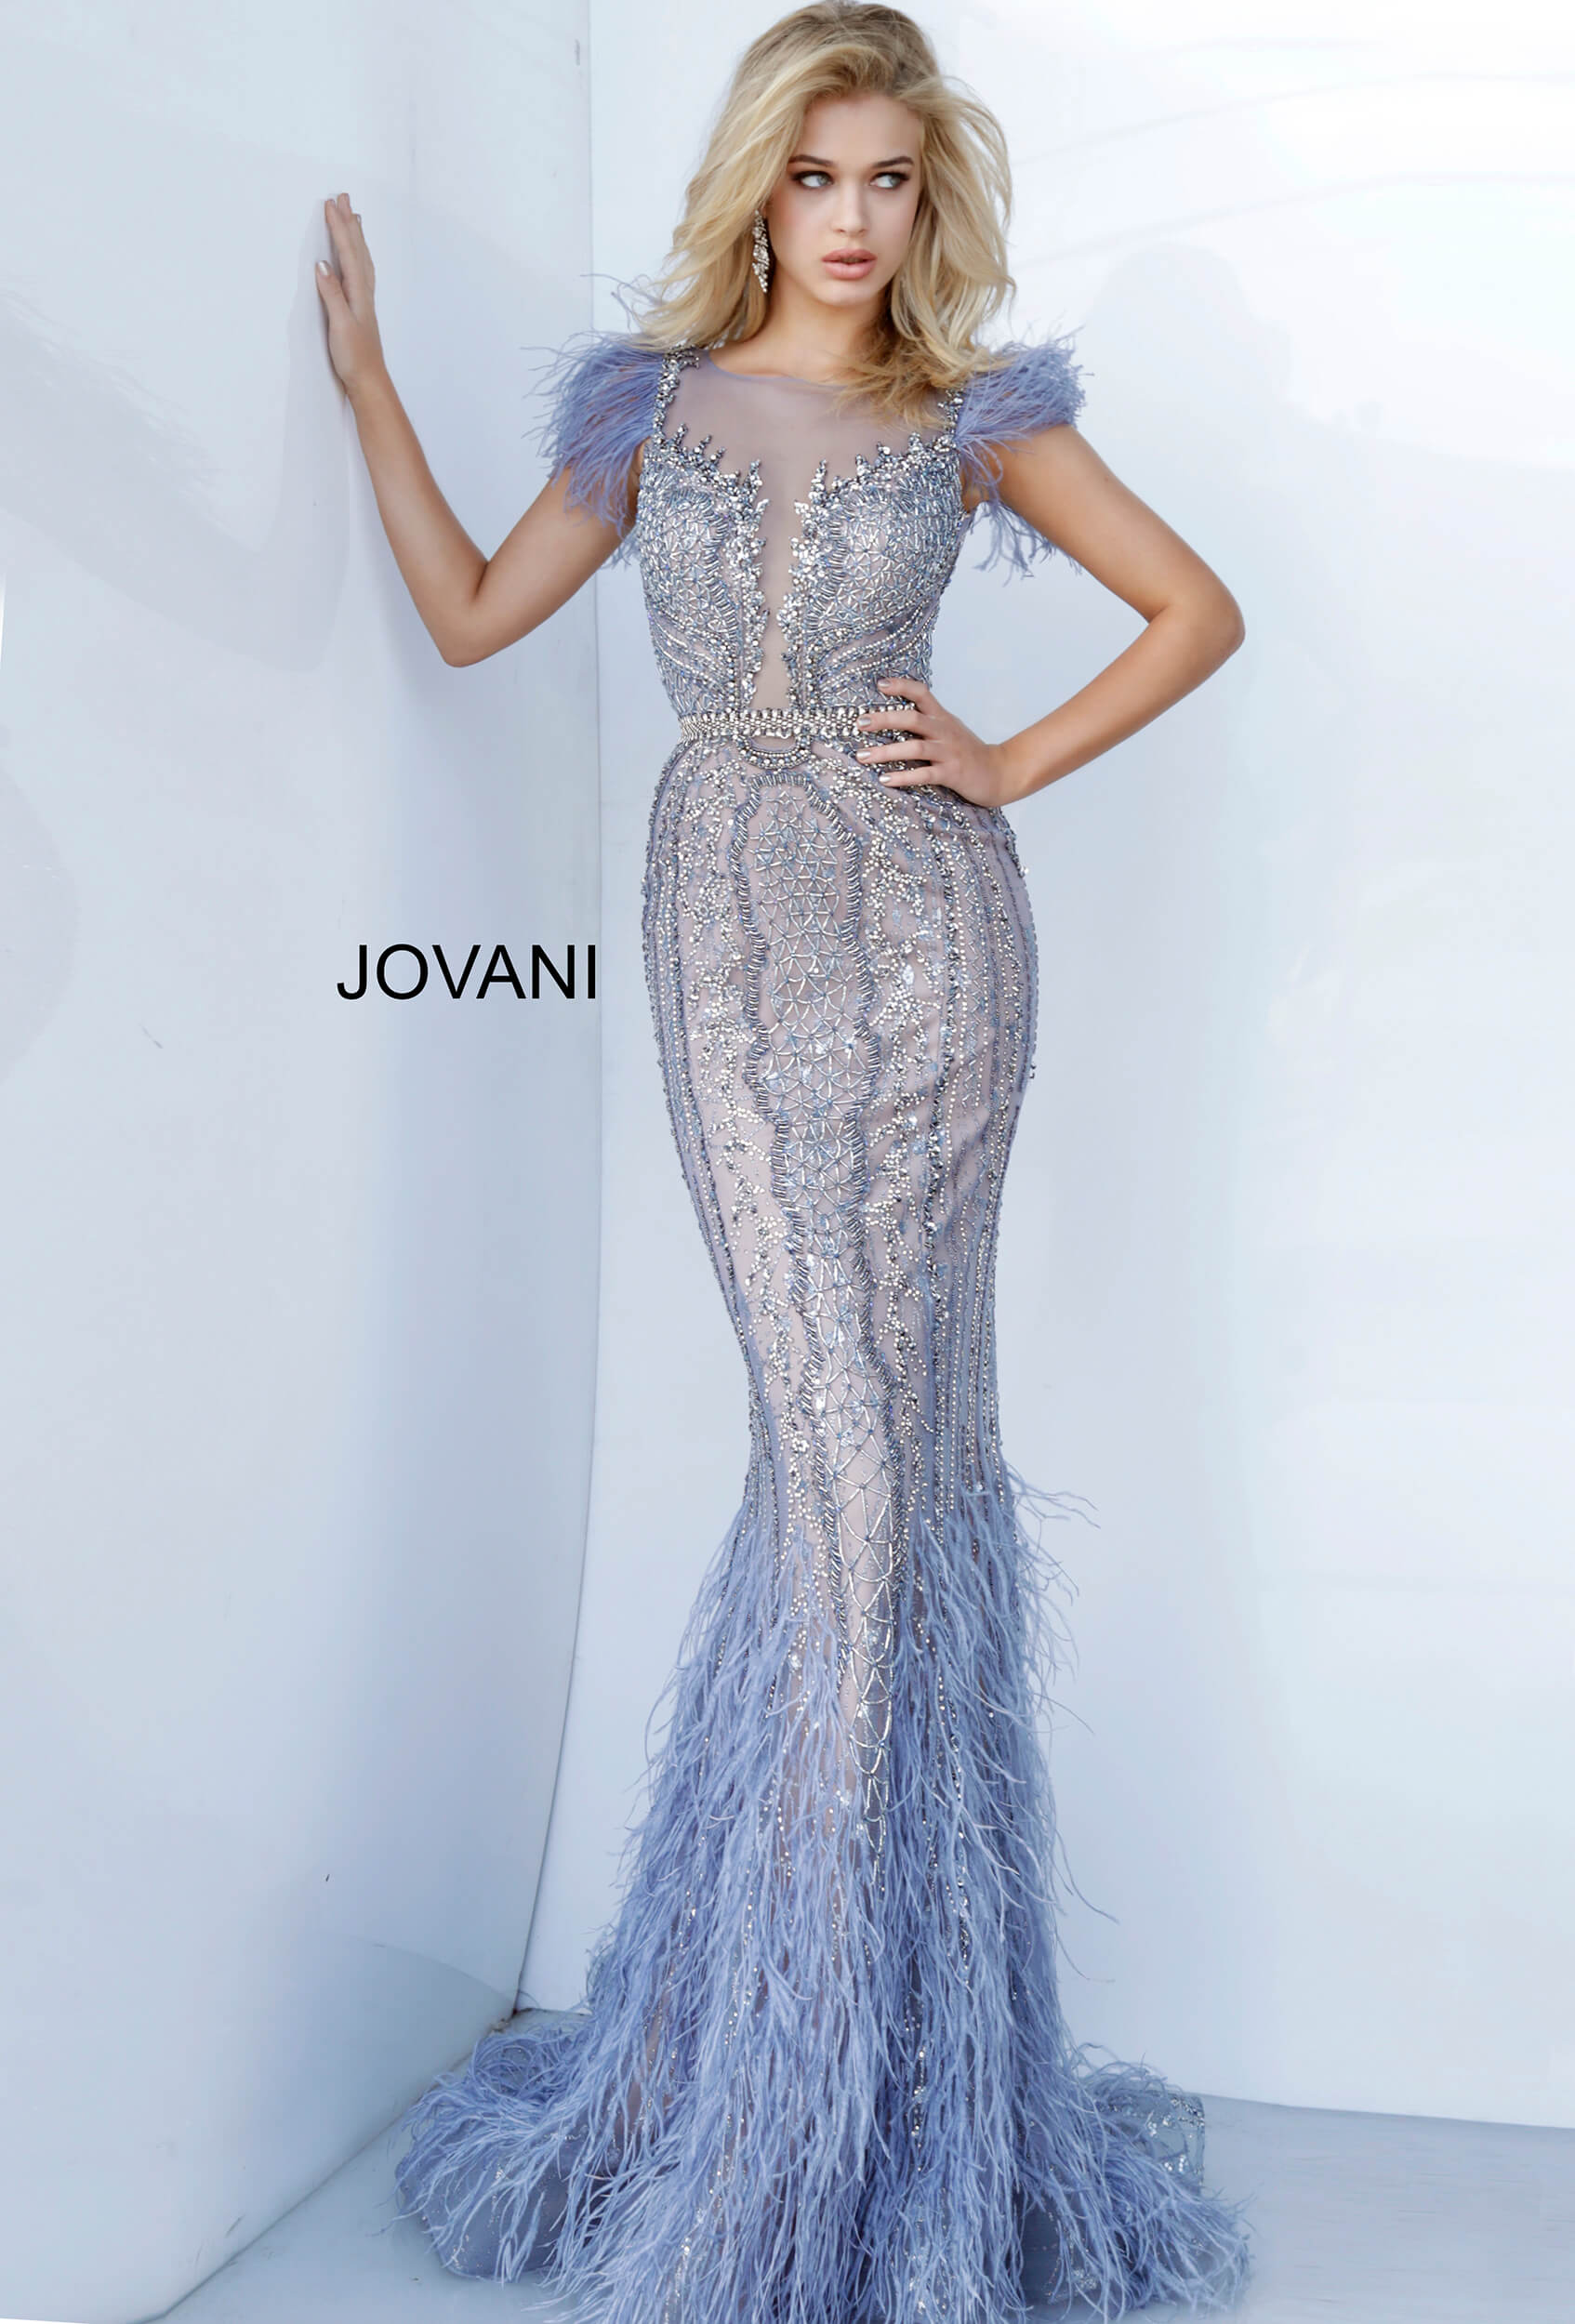 Jovani Couture 02326 is a long fitted Formal Evening Gown Great For Pageants, Red Carpet Events, Event Guests & More! Fit & Flare Mermaid silhouette with a sheer Illusion high neckline with a plunging effect with mesh trimmed in Embellishments that cascade into the bodice. Hand Beaded with sequin, liquid beading, Beaded Fringe tassels & rhinestones. Vintage blue embellished evening dress with a sheer illusion boat neckline, feather trim cap sleeves, beaded waist belt and closed sheer back.